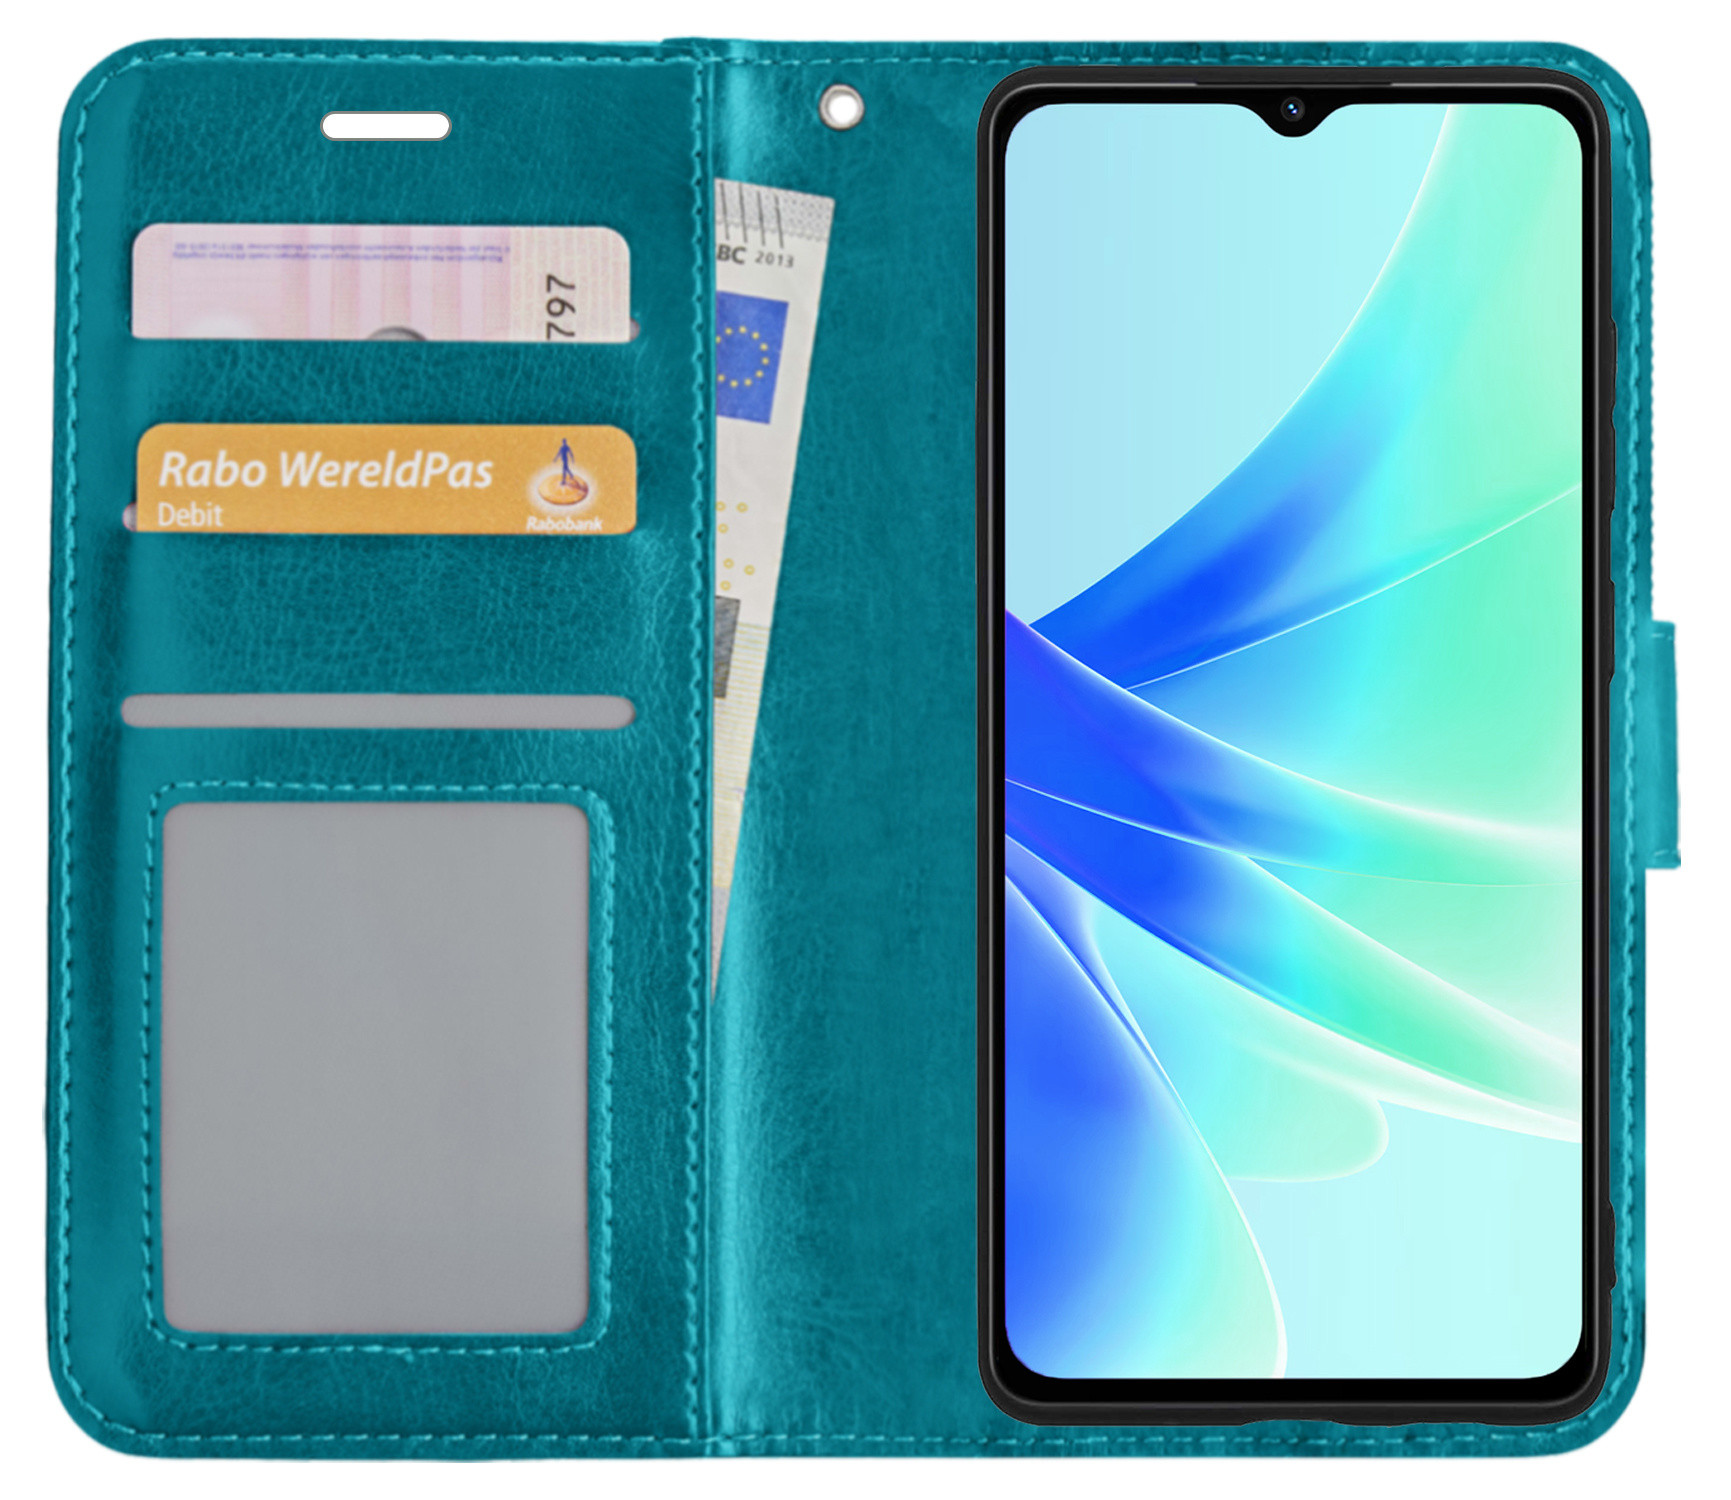 OPPO A17 Hoesje Bookcase Hoes Flip Case Book Cover 2x Met Screenprotector - OPPO A17 Hoes Book Case Hoesje - Turquoise